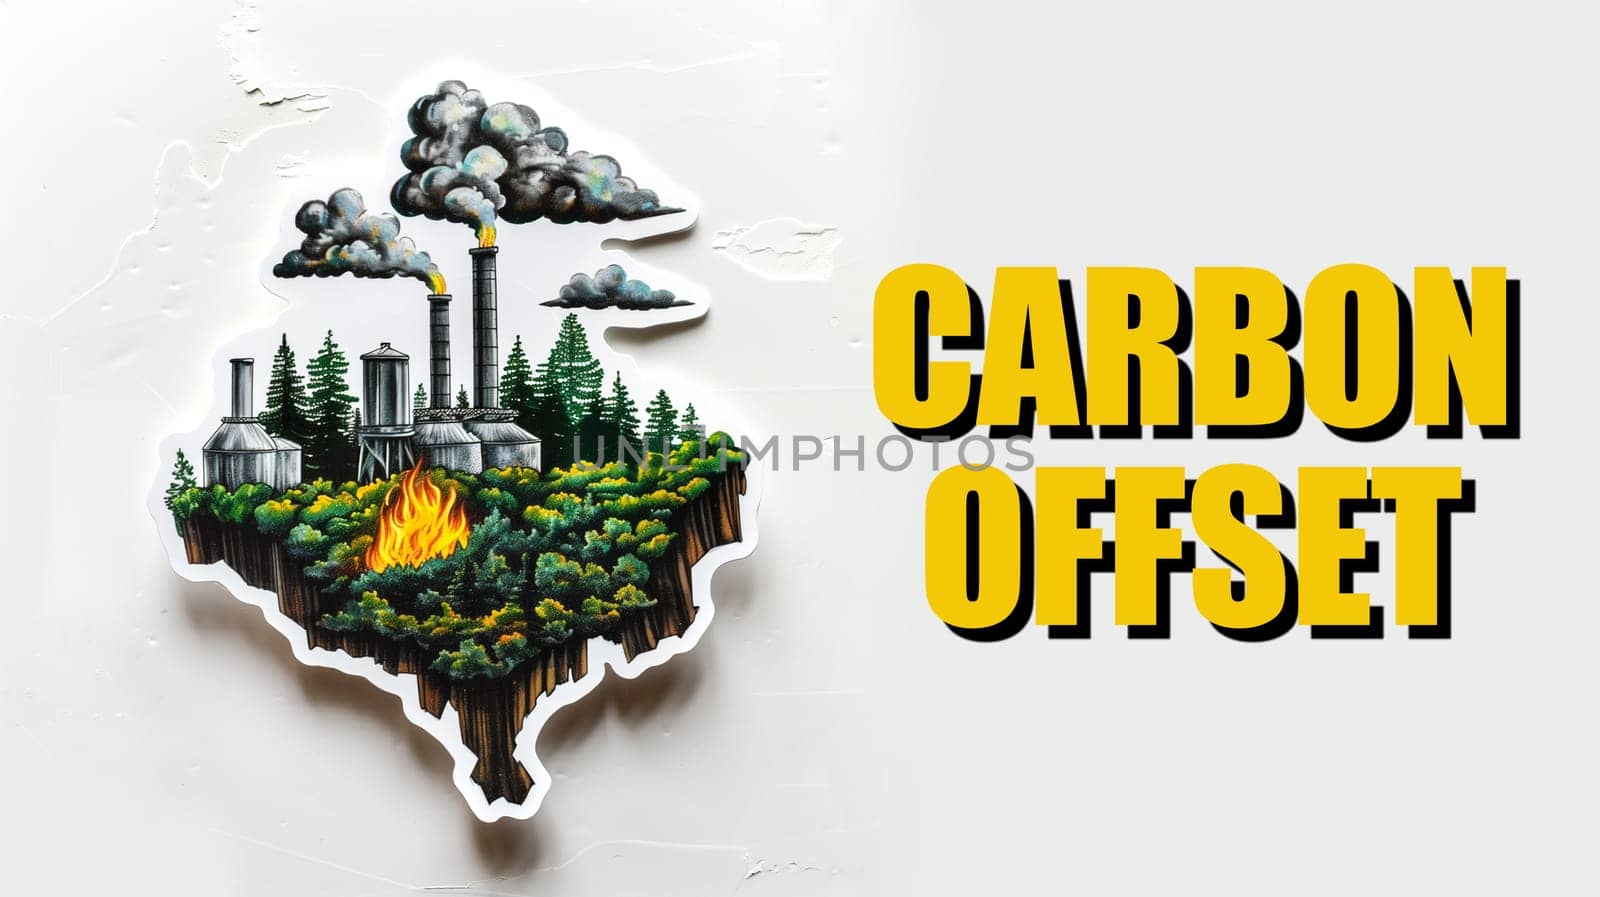 A sticker featuring the words carbon offset printed on it, symbolizing a commitment to reducing carbon emissions and combating climate change.